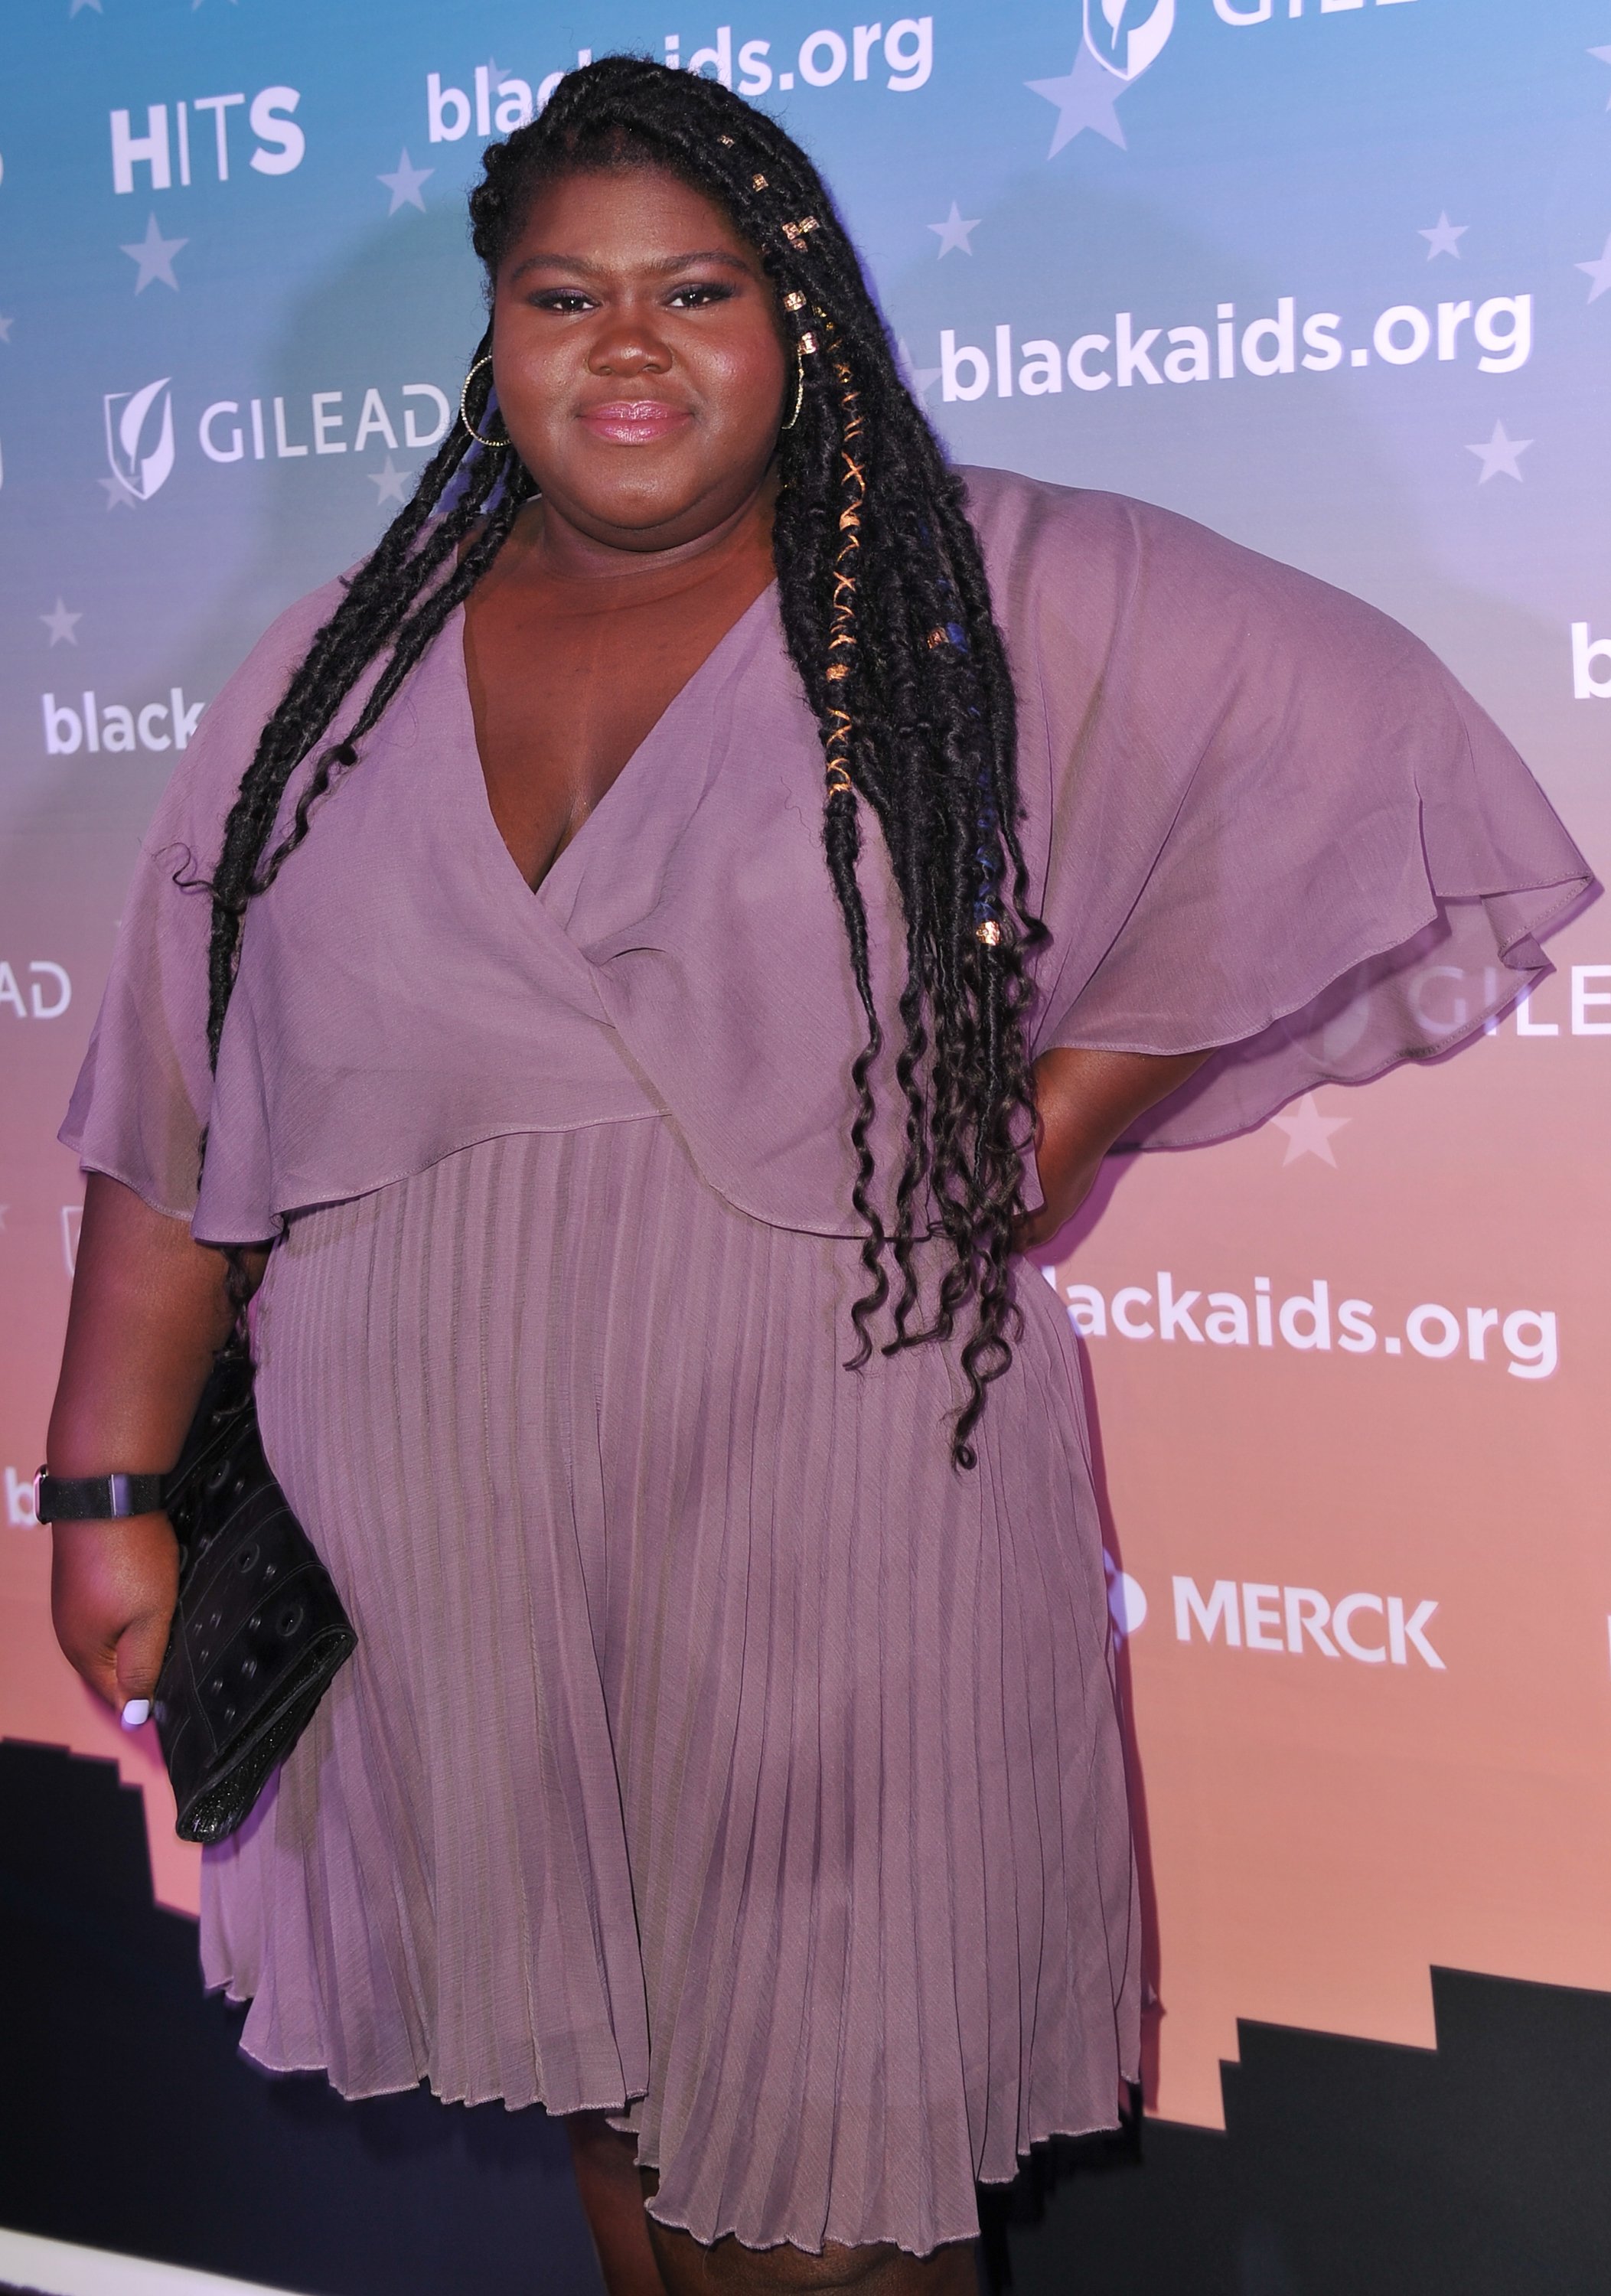 Gabourey Sidibe at the Black AIDS Institute's 2018 “Heroes in The Struggle” gala at the California African American Museum on December 01, 2018 in Los Angeles, California | Source: Getty Images